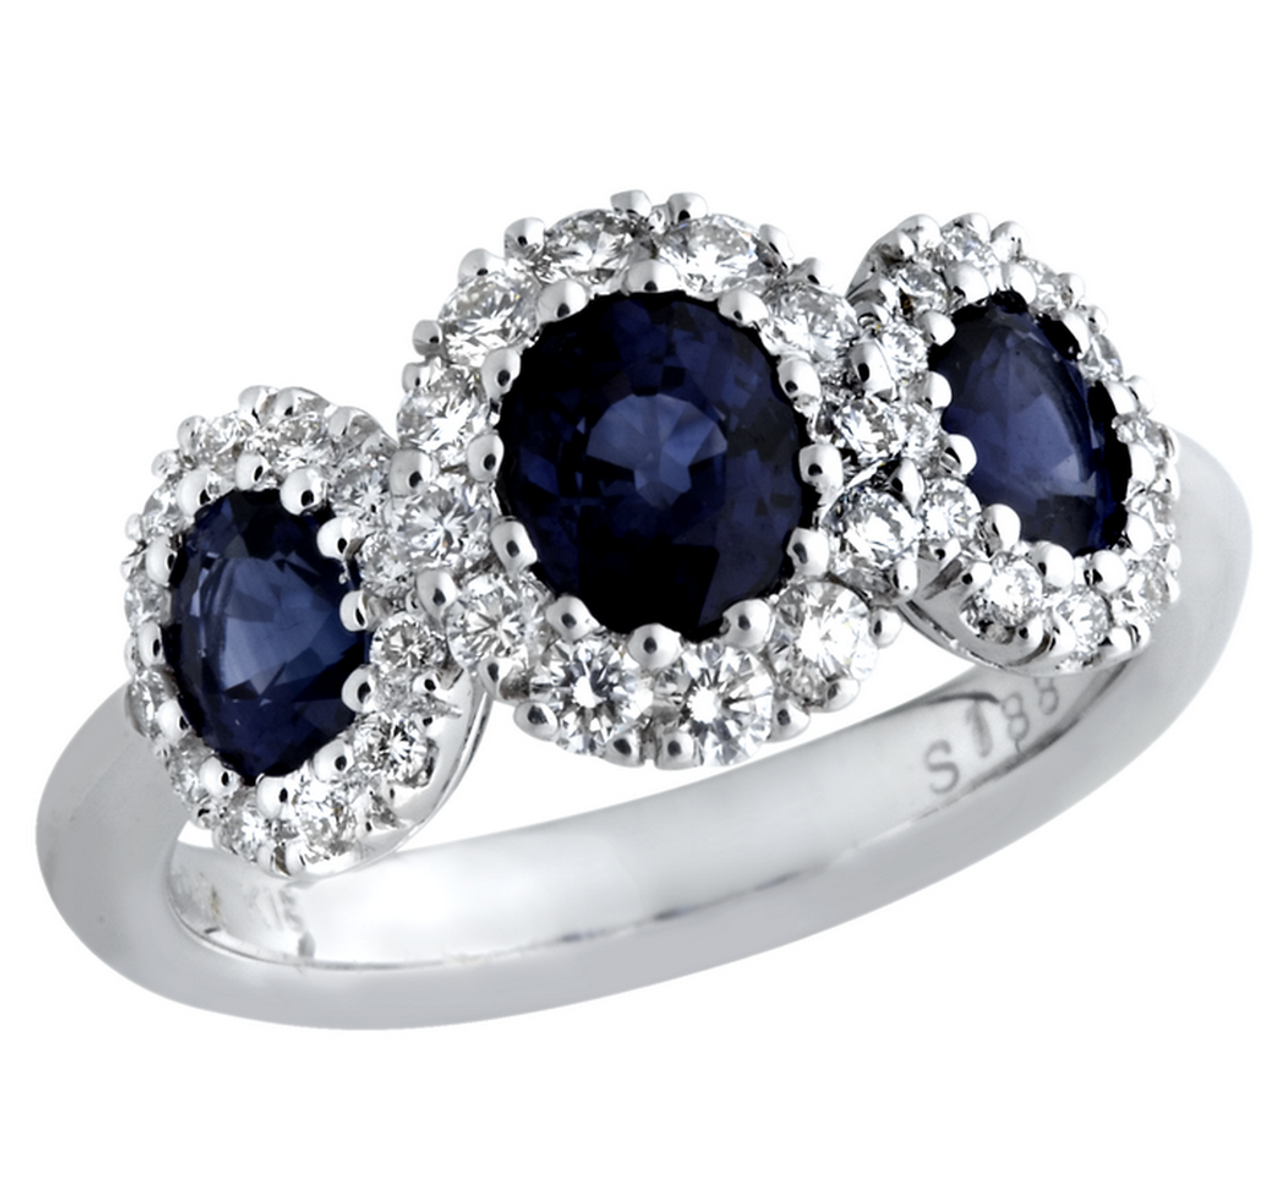 Diamond and Sapphire Ring Antique | Antique Jewellery | AC Silver